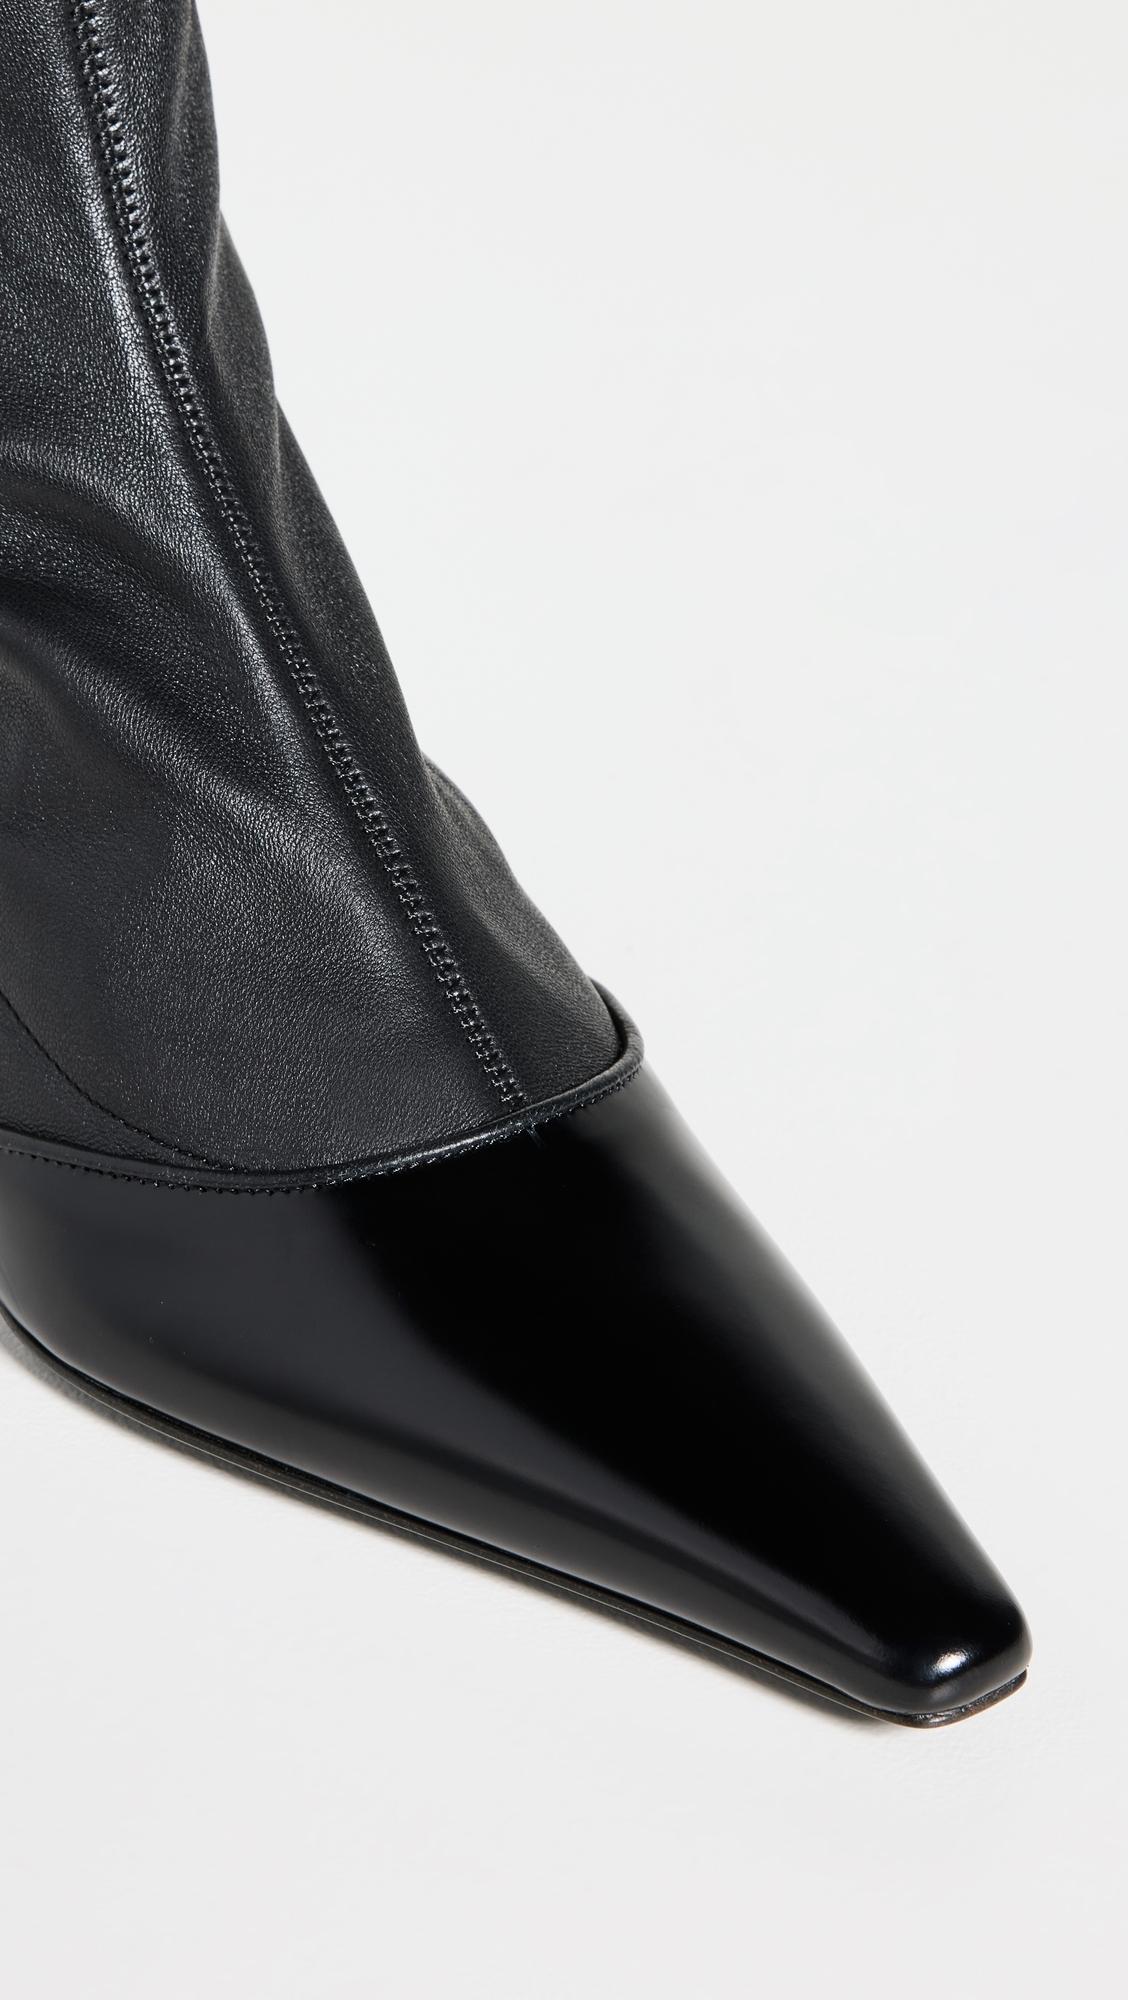 Acne Studios Bano Boots Brush-off in Black | Lyst